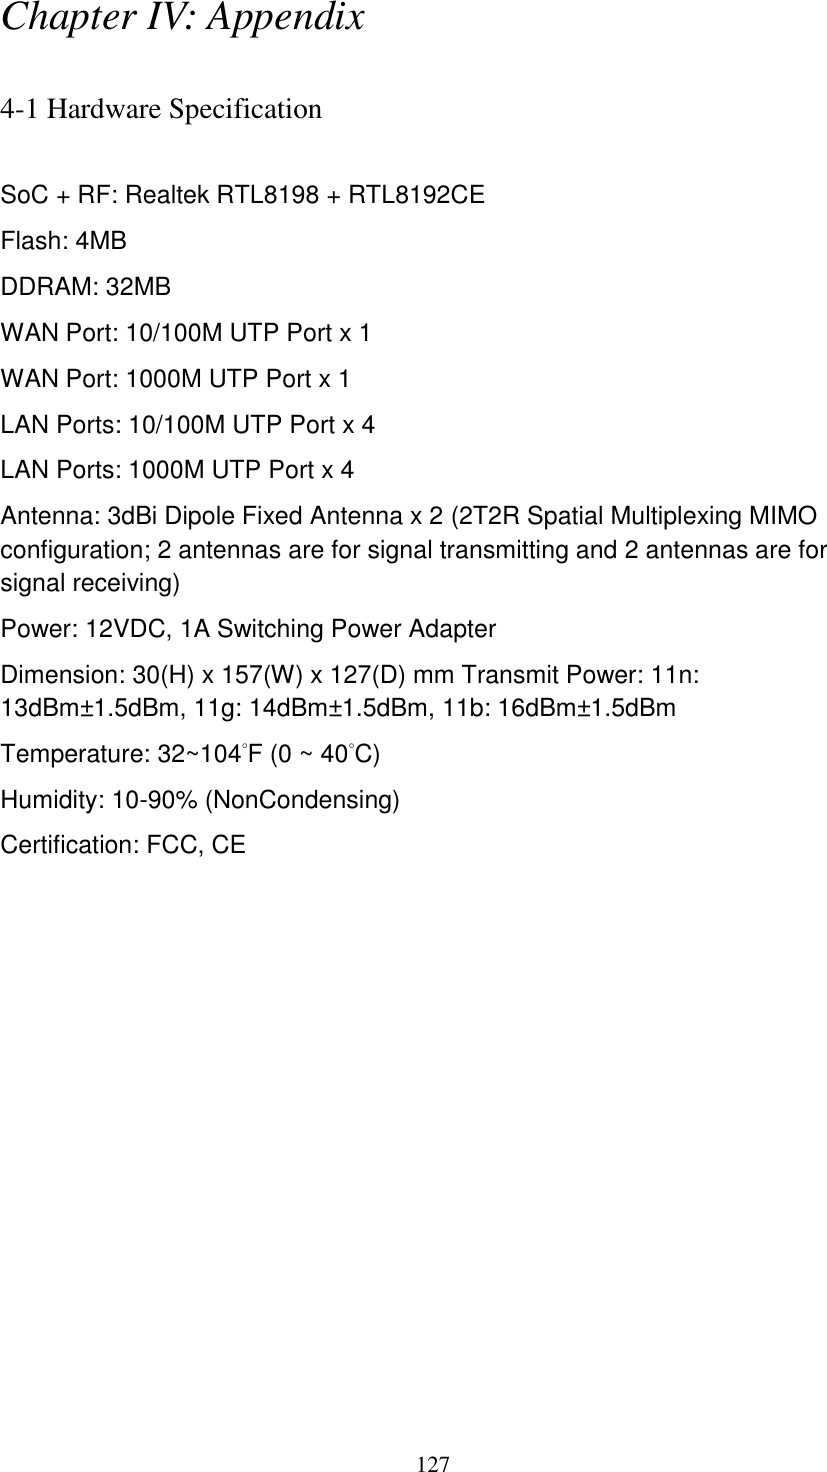 127 Chapter IV: Appendix  4-1 Hardware Specification  SoC + RF: Realtek RTL8198 + RTL8192CE Flash: 4MB   DDRAM: 32MB WAN Port: 10/100M UTP Port x 1 WAN Port: 1000M UTP Port x 1 LAN Ports: 10/100M UTP Port x 4 LAN Ports: 1000M UTP Port x 4 Antenna: 3dBi Dipole Fixed Antenna x 2 (2T2R Spatial Multiplexing MIMO configuration; 2 antennas are for signal transmitting and 2 antennas are for signal receiving) Power: 12VDC, 1A Switching Power Adapter Dimension: 30(H) x 157(W) x 127(D) mm Transmit Power: 11n: 13dBm±1.5dBm, 11g: 14dBm±1.5dBm, 11b: 16dBm±1.5dBm   Temperature: 32~104°F (0 ~ 40°C) Humidity: 10-90% (NonCondensing) Certification: FCC, CE 